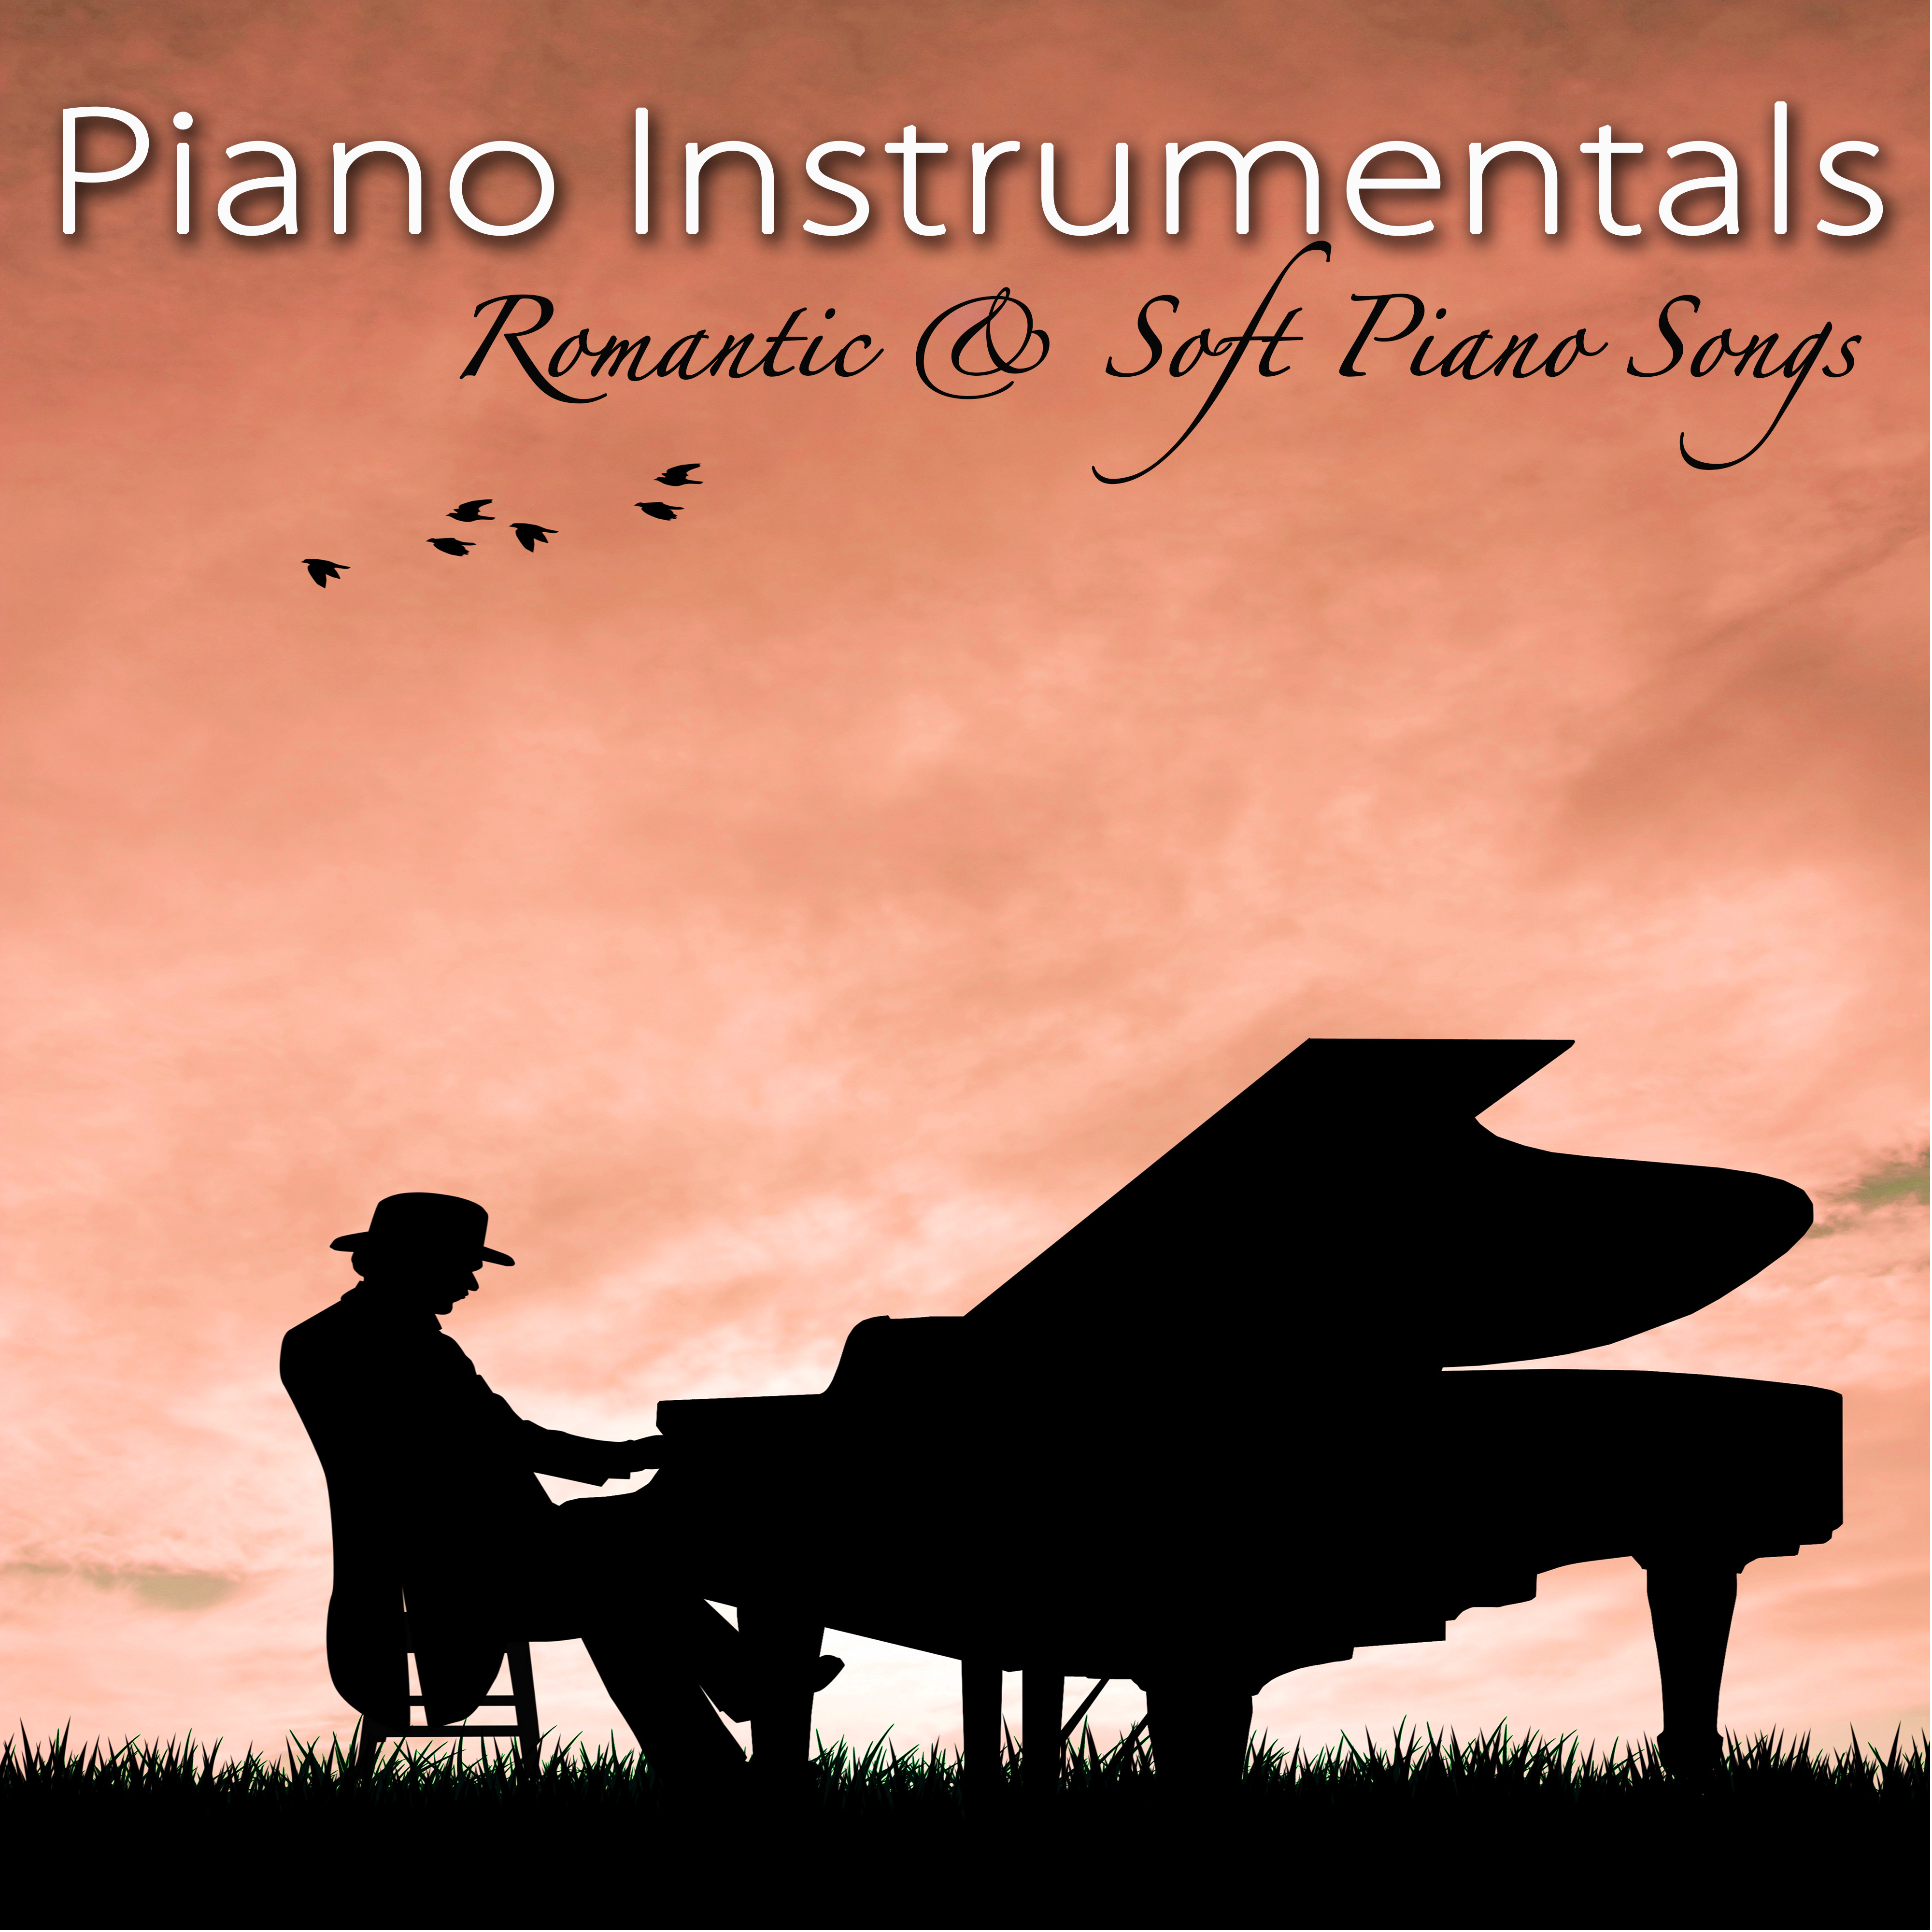 Piano Instrumentals  Romantic  Soft Piano Songs for Lovers Dinner